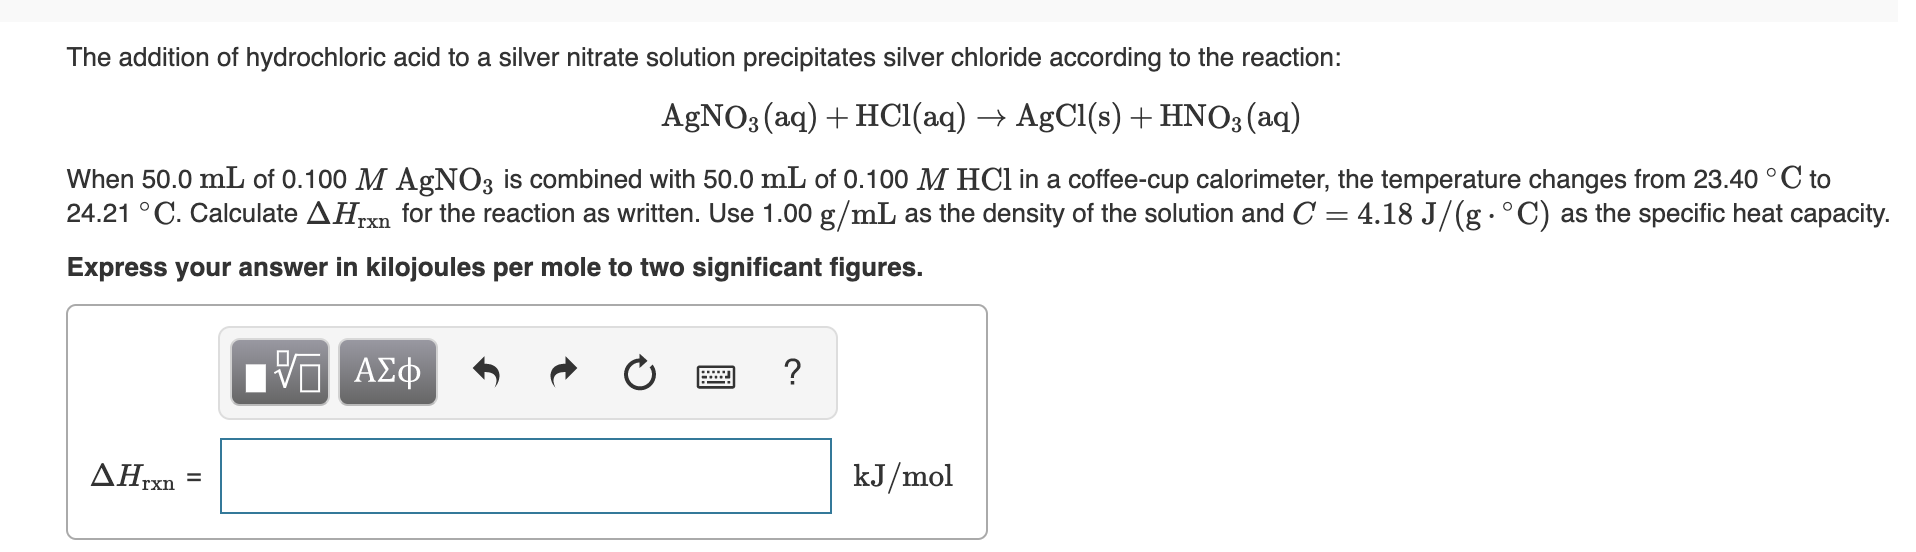 The addition of hydrochloric acid to a silver nitrate solution precipitates silver chloride according to the reaction:
AGNO3 (aq) + HCl(aq) → AgCl(s) + HNO3(aq)
When 50.0 mL of 0.100 M AgNO3 is combined with 50.0 mL of 0.100 M HCI in a coffee-cup calorimeter, the temperature changes from 23.40 °C to
24.21 °C. Calculate AHrxn for the reaction as written. Use 1.00 g/mL as the density of the solution and C = 4.18 J/(g·°C) as the specific heat capacity.
Express your answer in kilojoules per mole to two significant figures.
HV ΑΣφ
ΔΗΚ
kJ/mol
%3D
